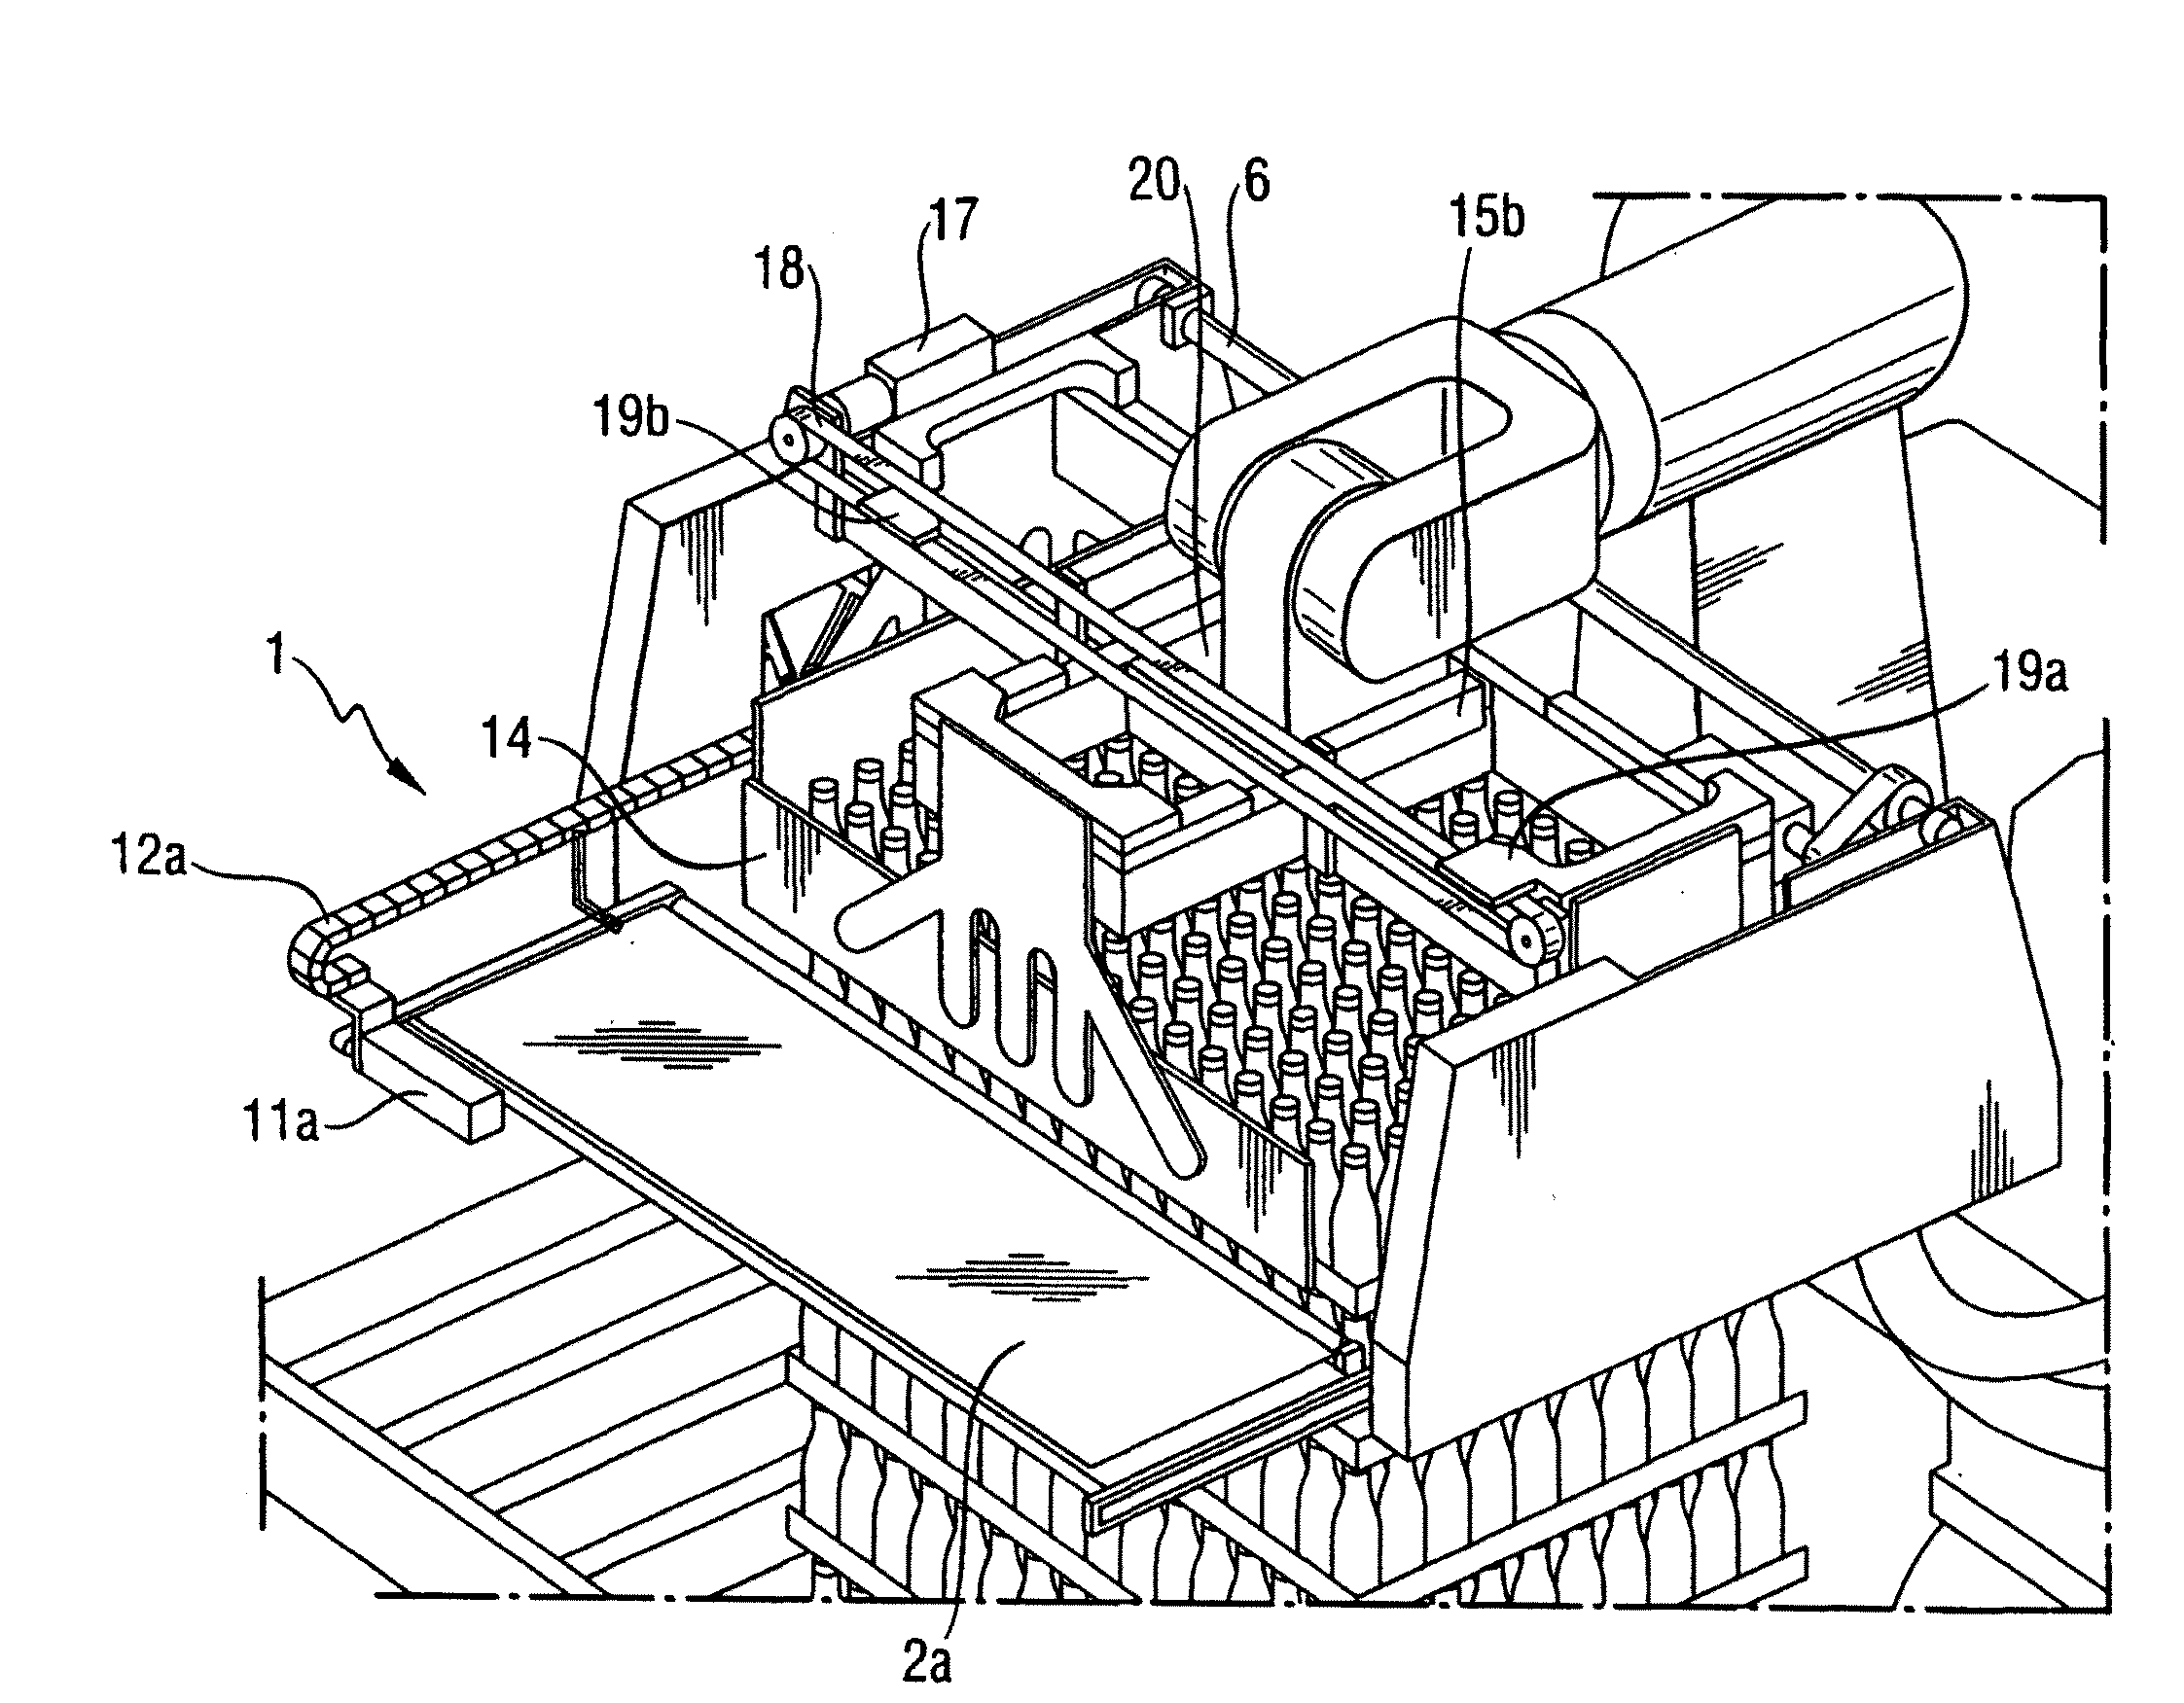 Device and method for depalletizing stacked bundles